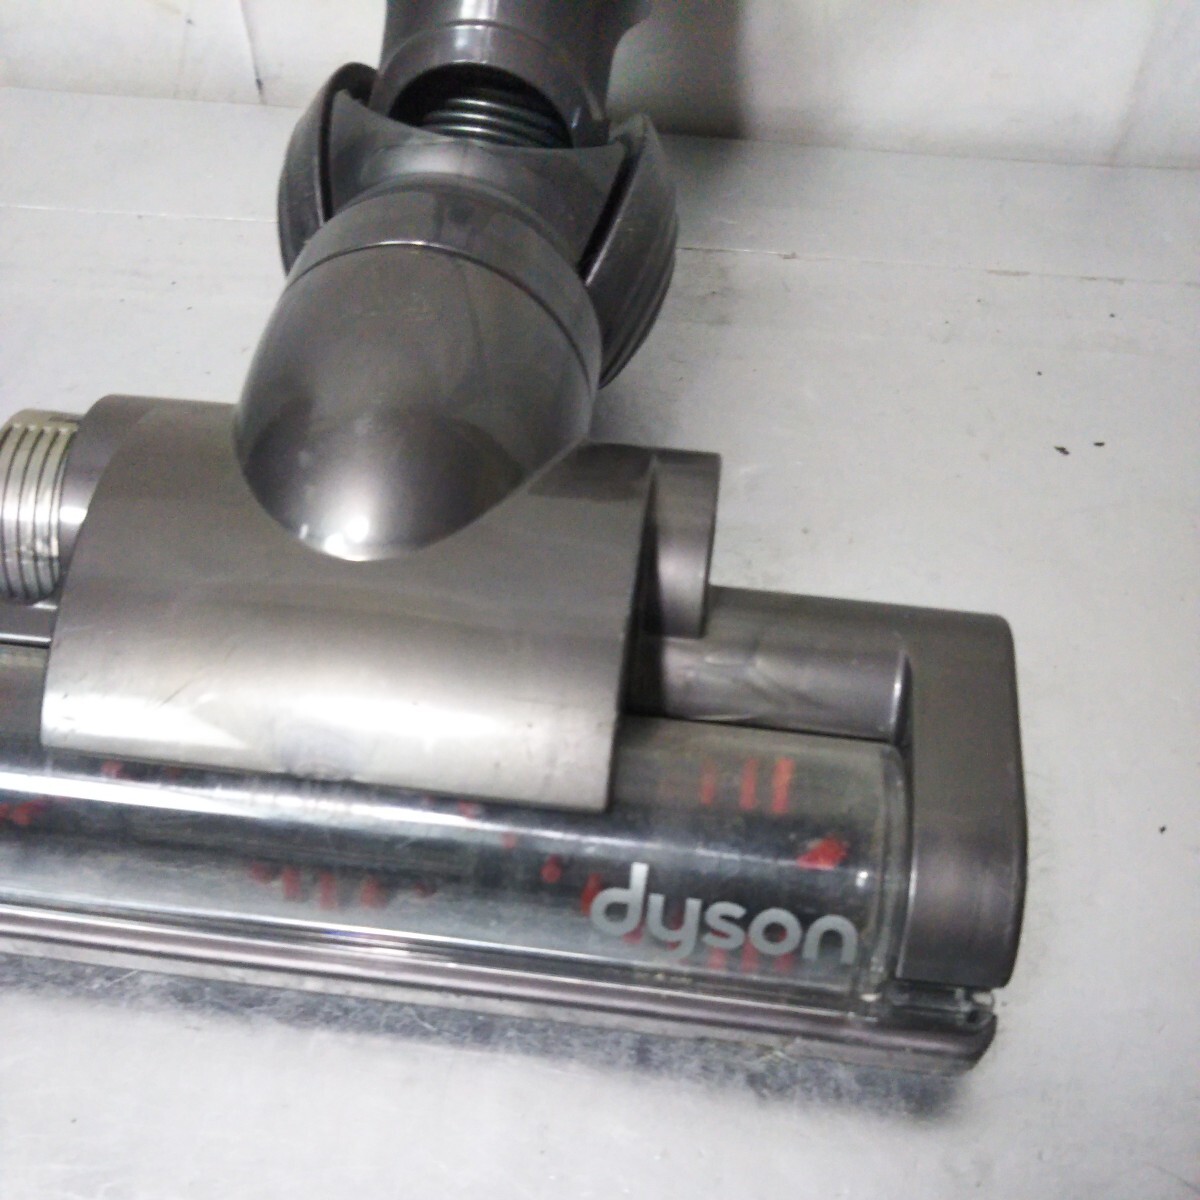  free shipping (4M684)dyson Dyson head only DC26